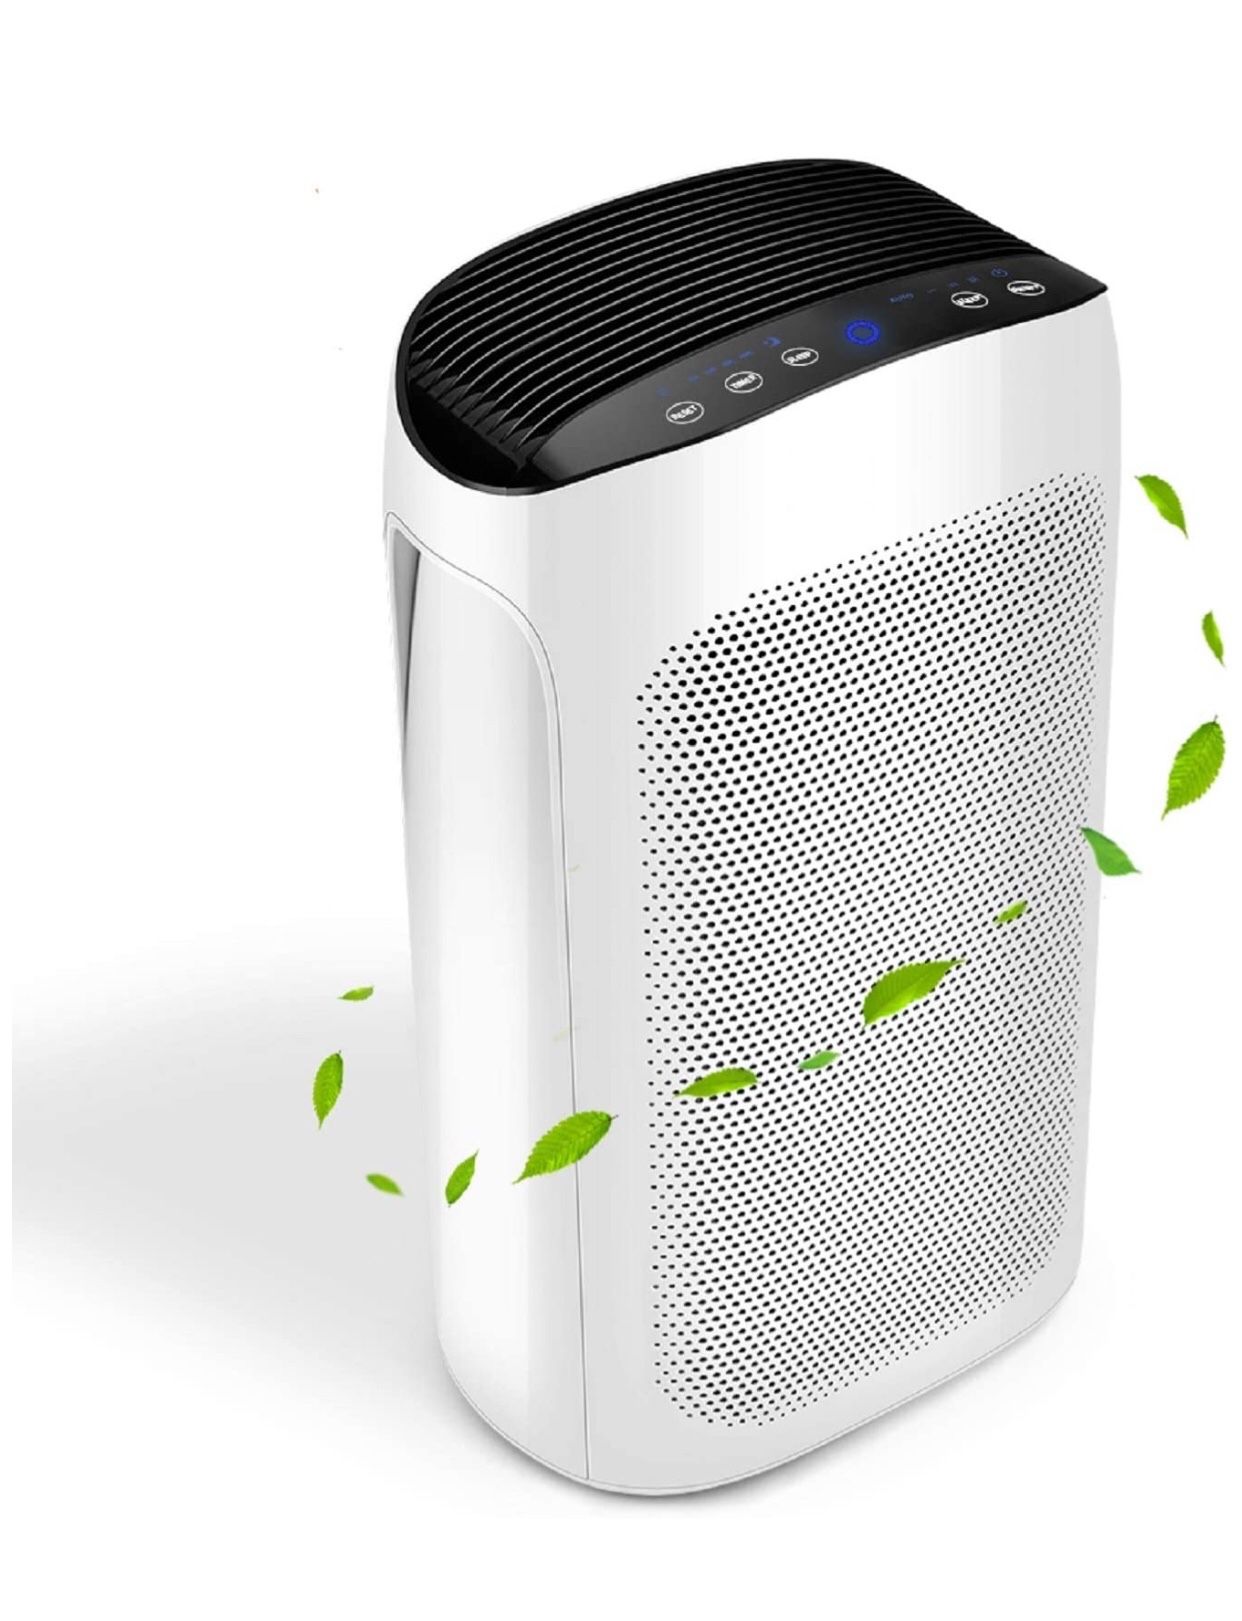 Air Choice 3-in-1 Air Purifier for home with Air Quality Auto Sensor, True HEPA Filter Cleaner for Allergies and Pets, Remove 99.97% Odor Eliminator